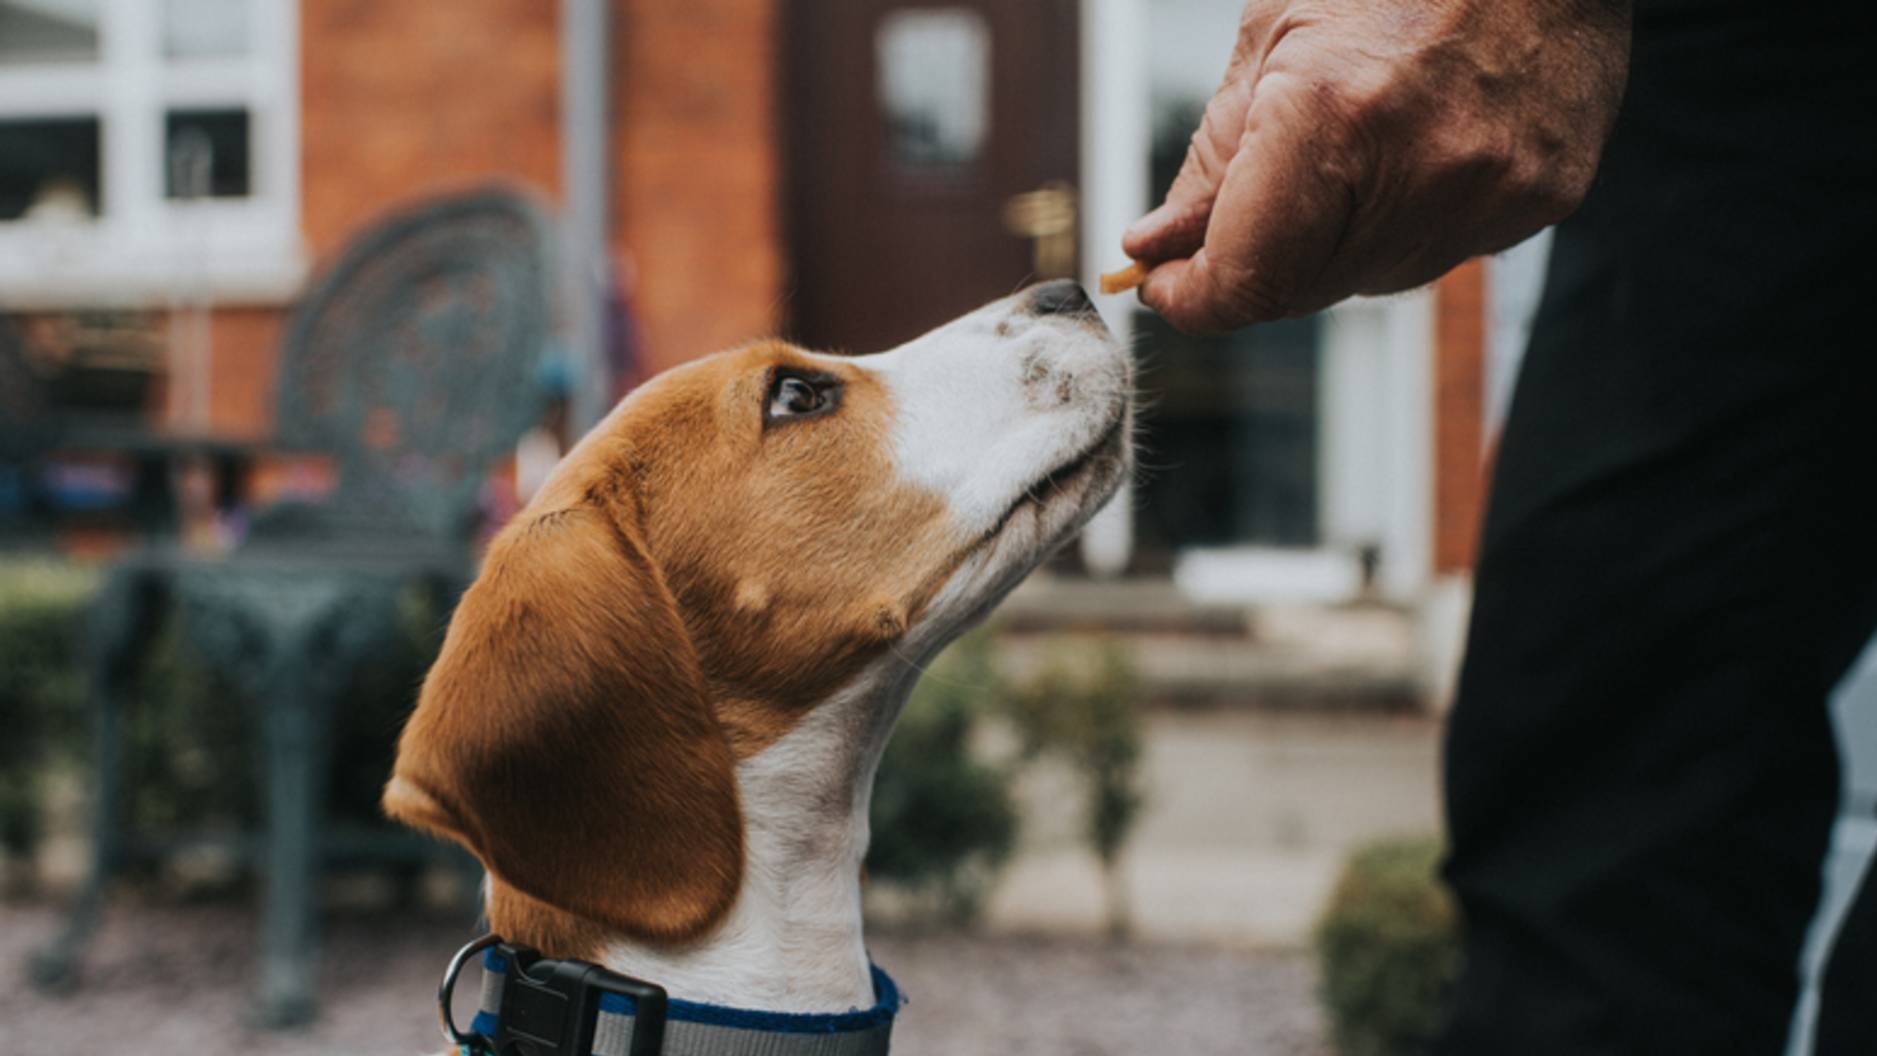 Training dogs with treats: How to reinforce good behavior the right way